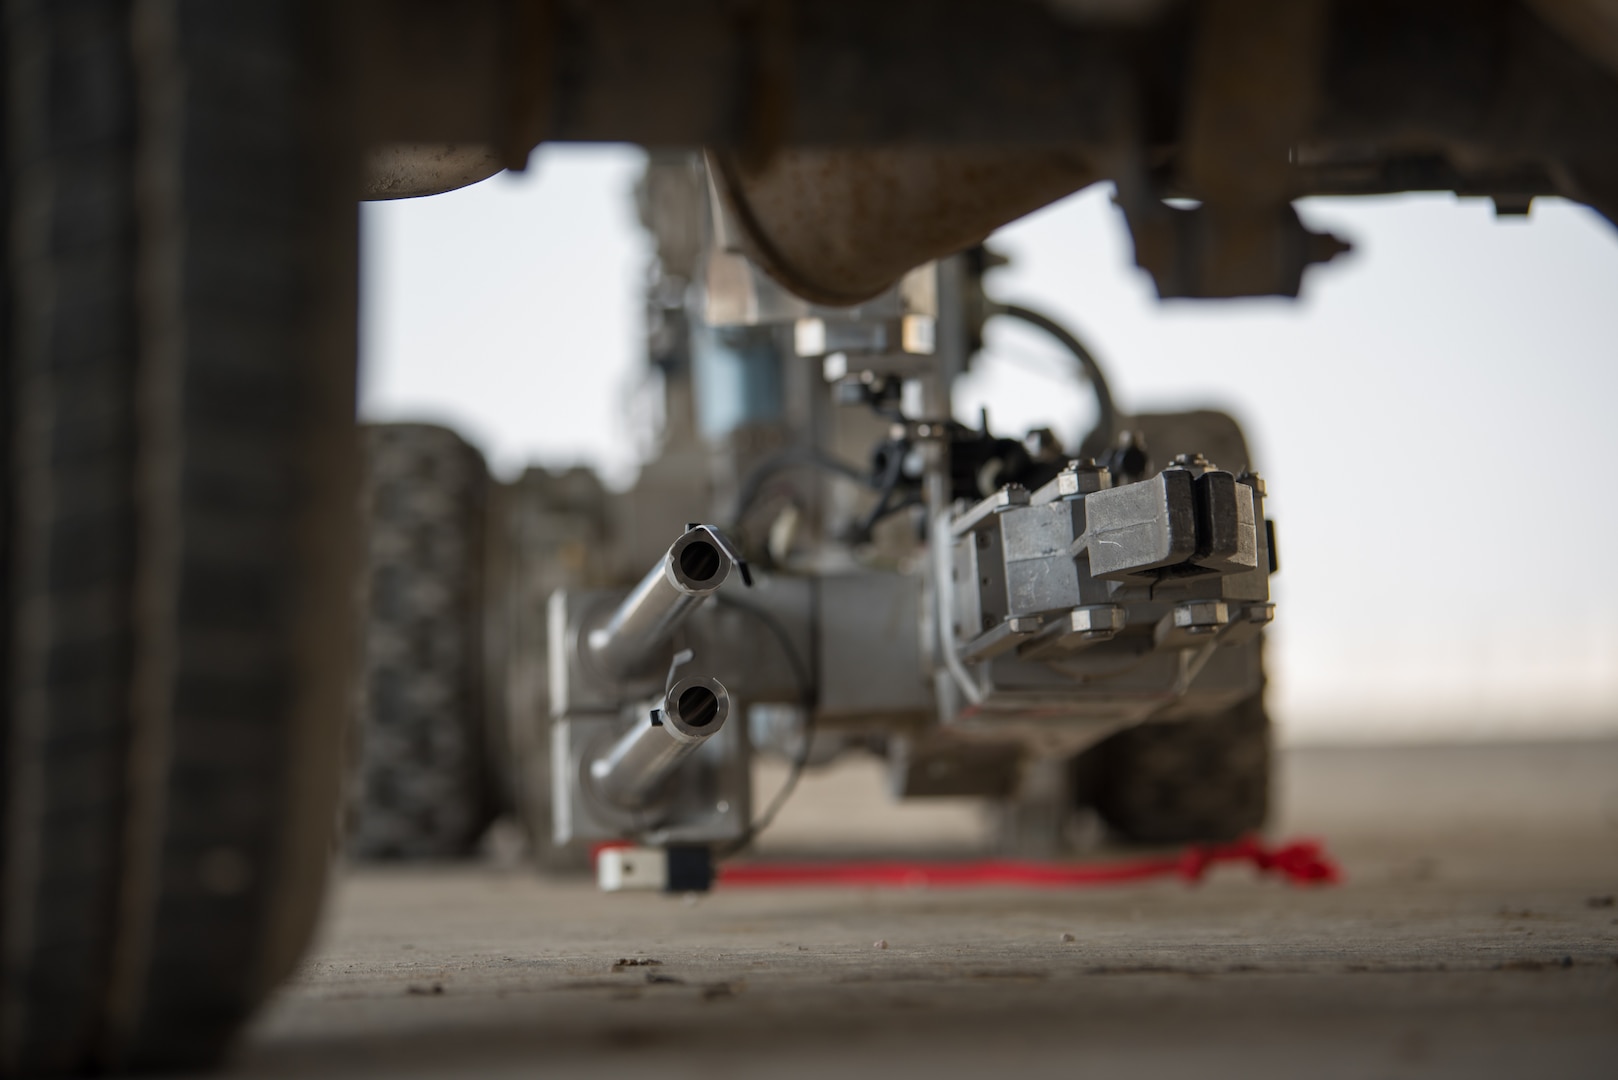 An F6B robot is utilized by members of the 379th Expeditionary Civil Engineer Squadron’s explosive ordnance disposal unit during a training scenario at Al Udeid Air Base, Qatar, Feb. 15, 2018.